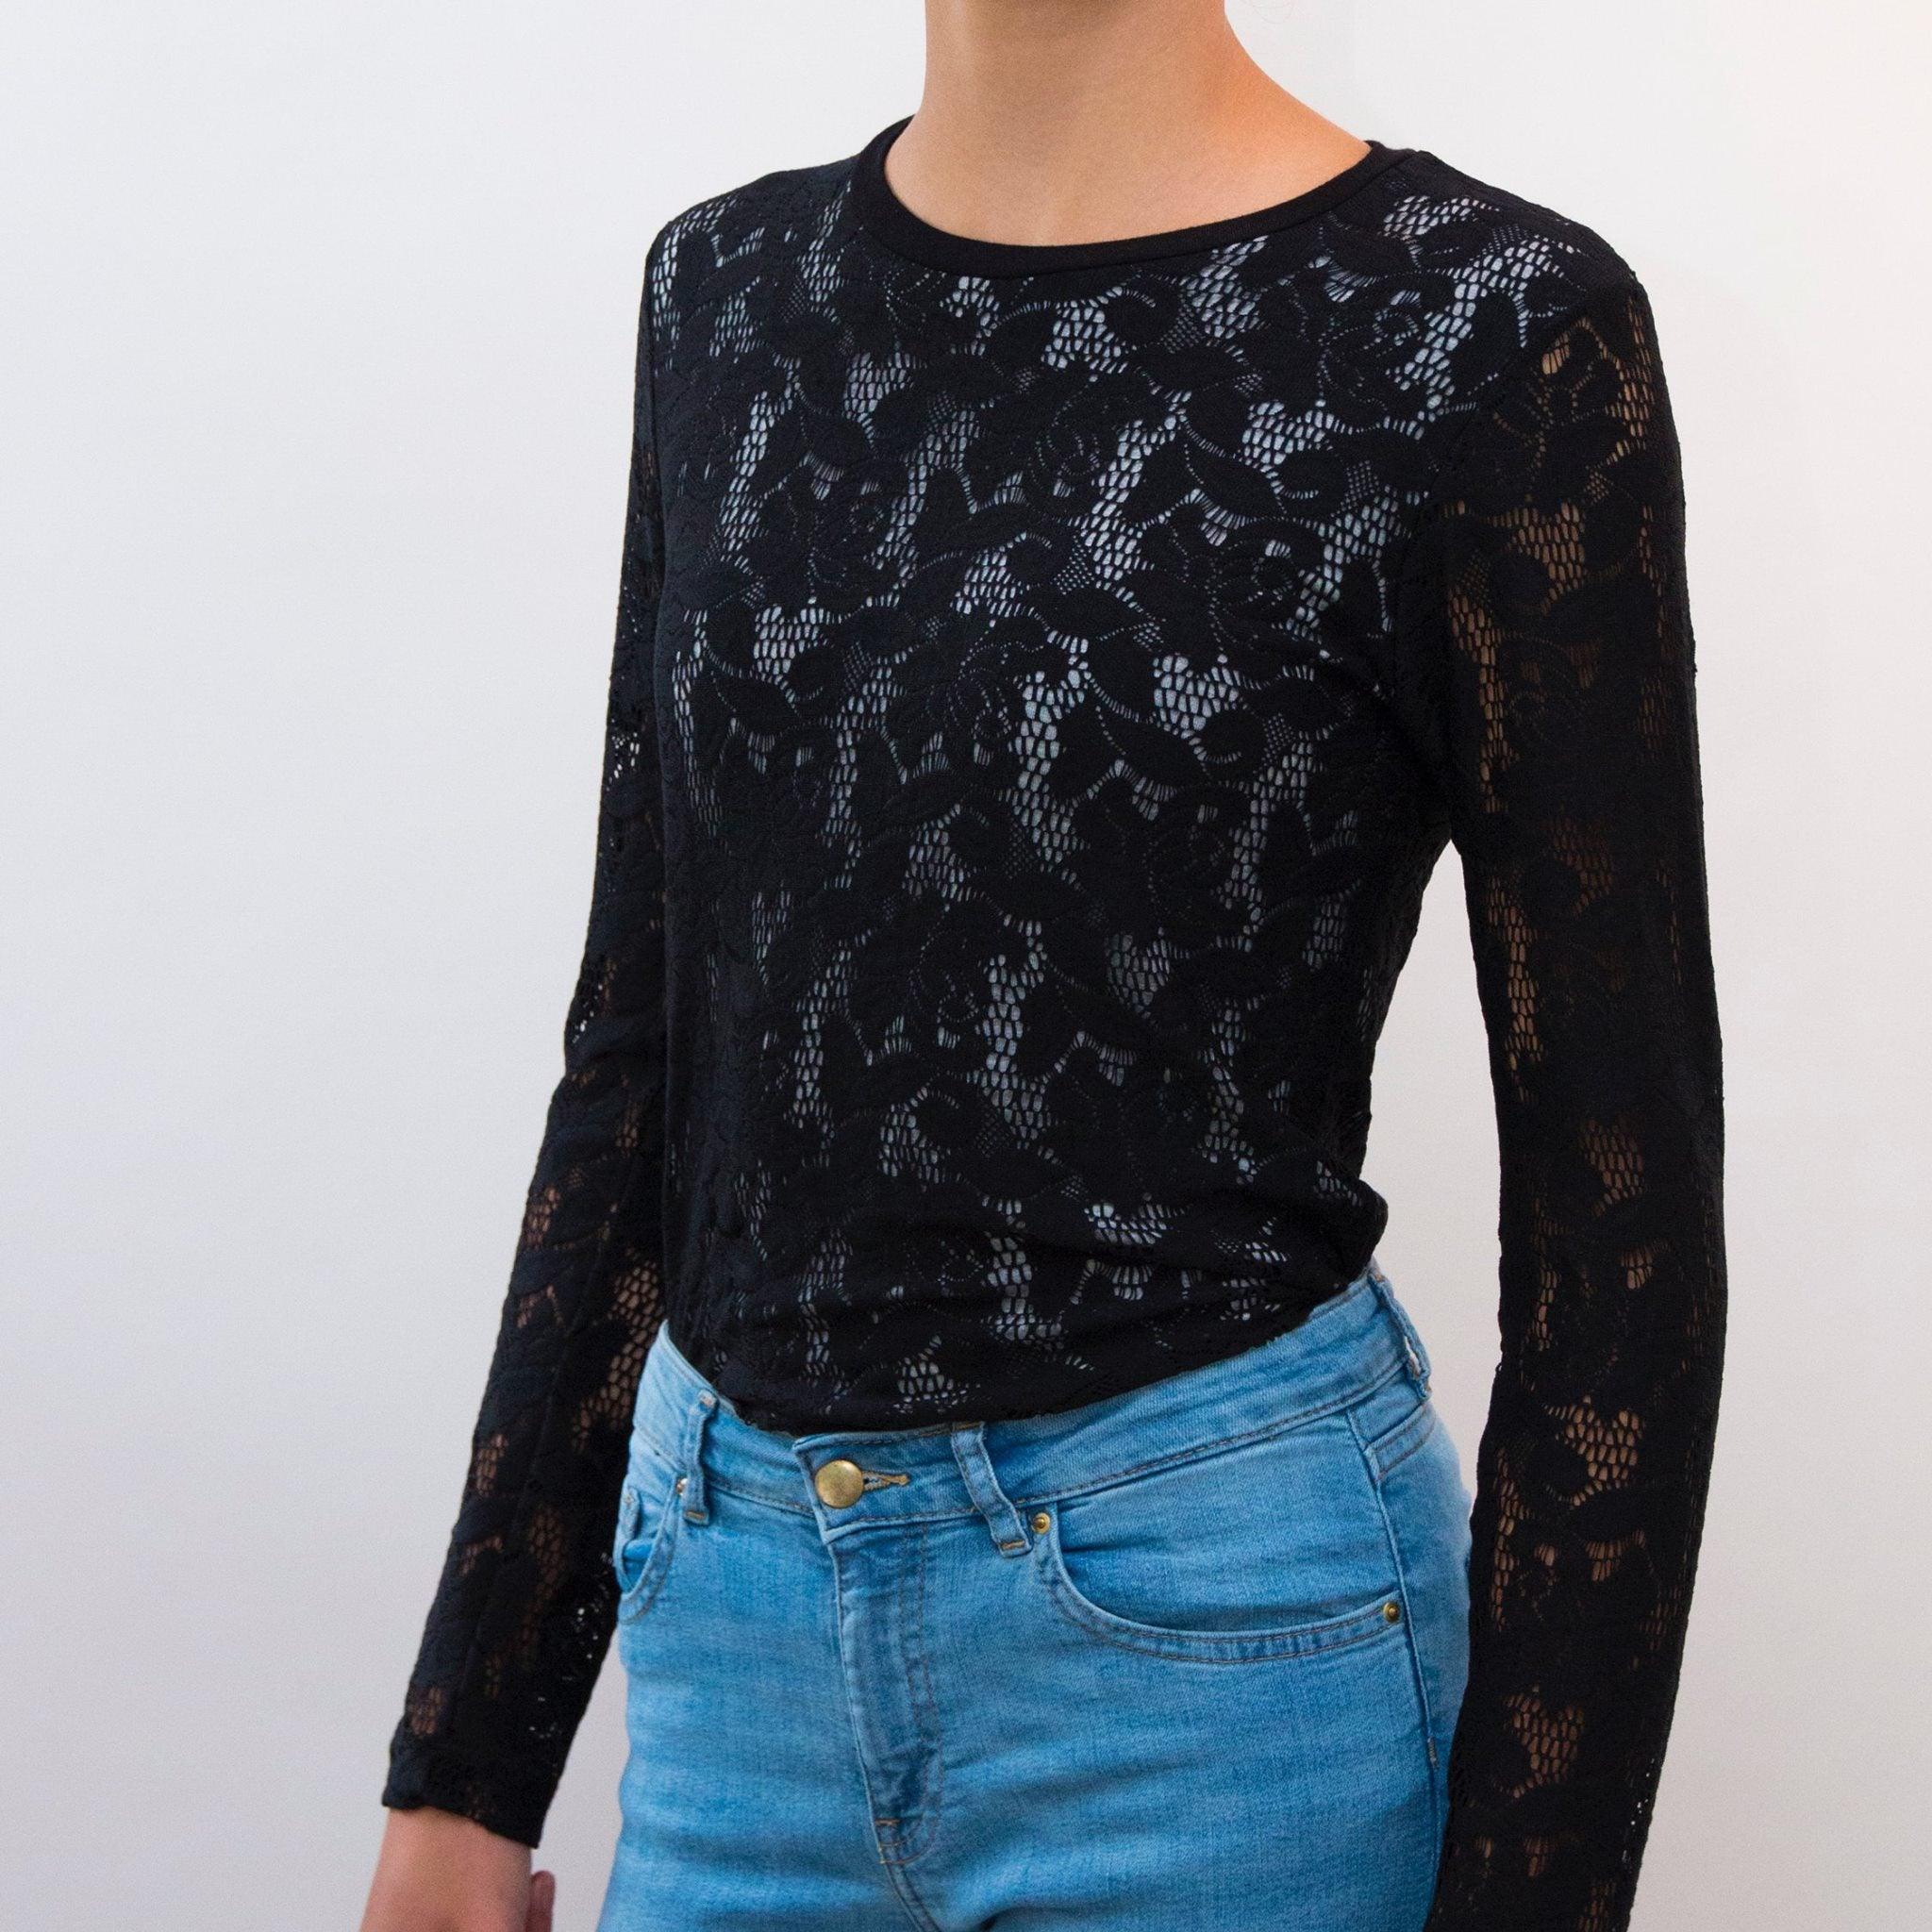 Long sleeve t-shirt in stretch lace. A layer was added to the front and back.